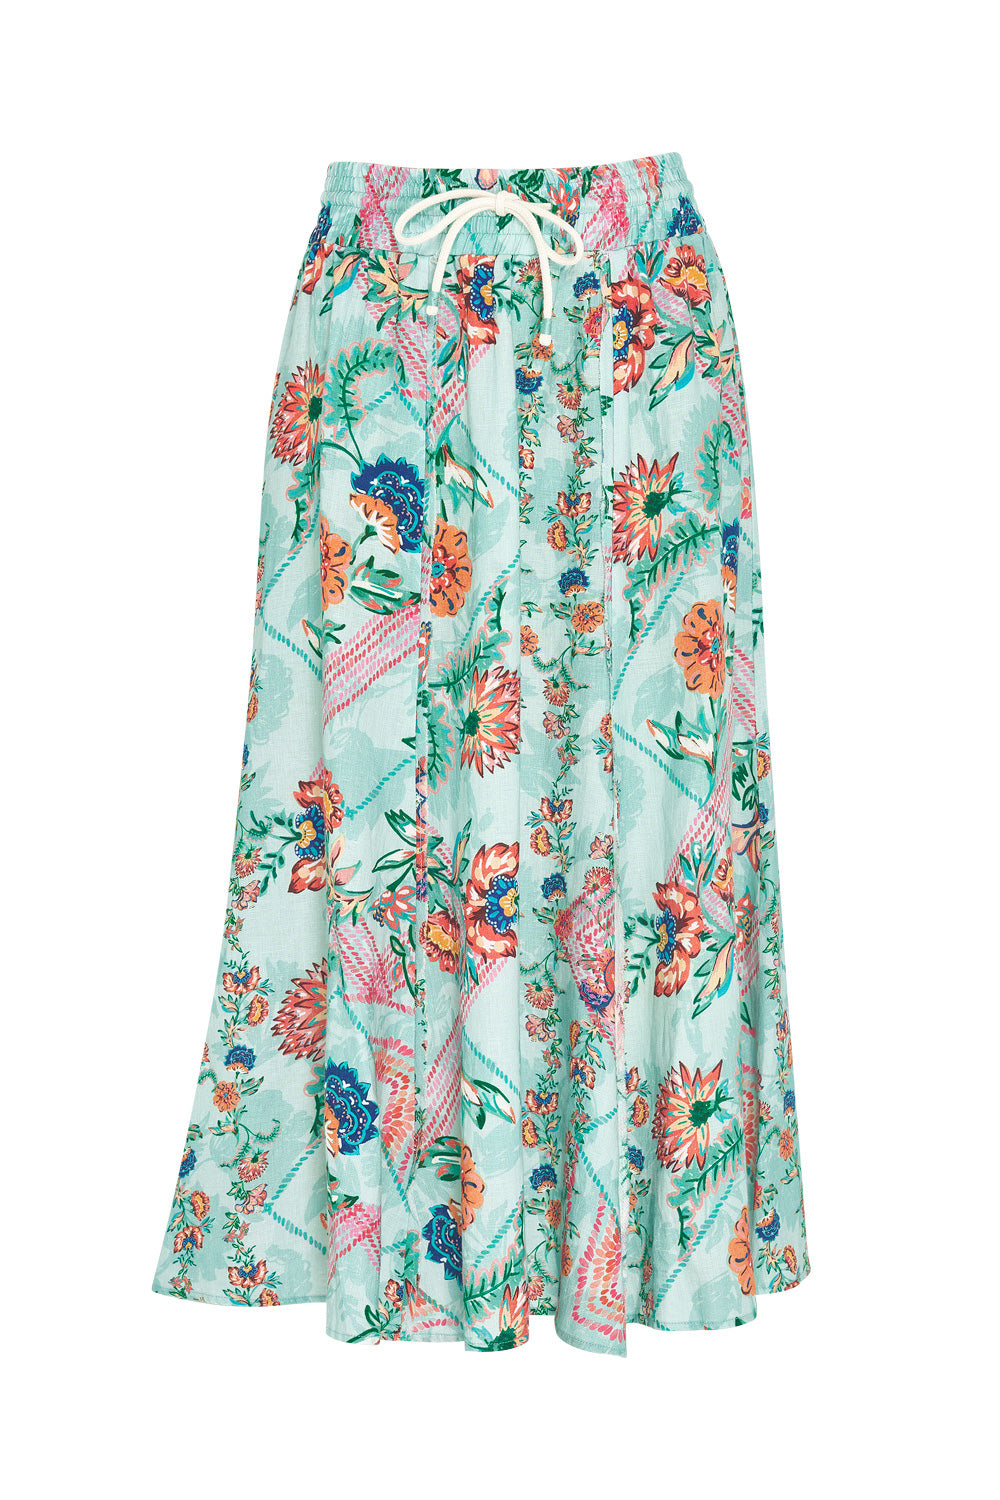 Seas The Day Skirt by Madly Sweetly – Loobie & Friends